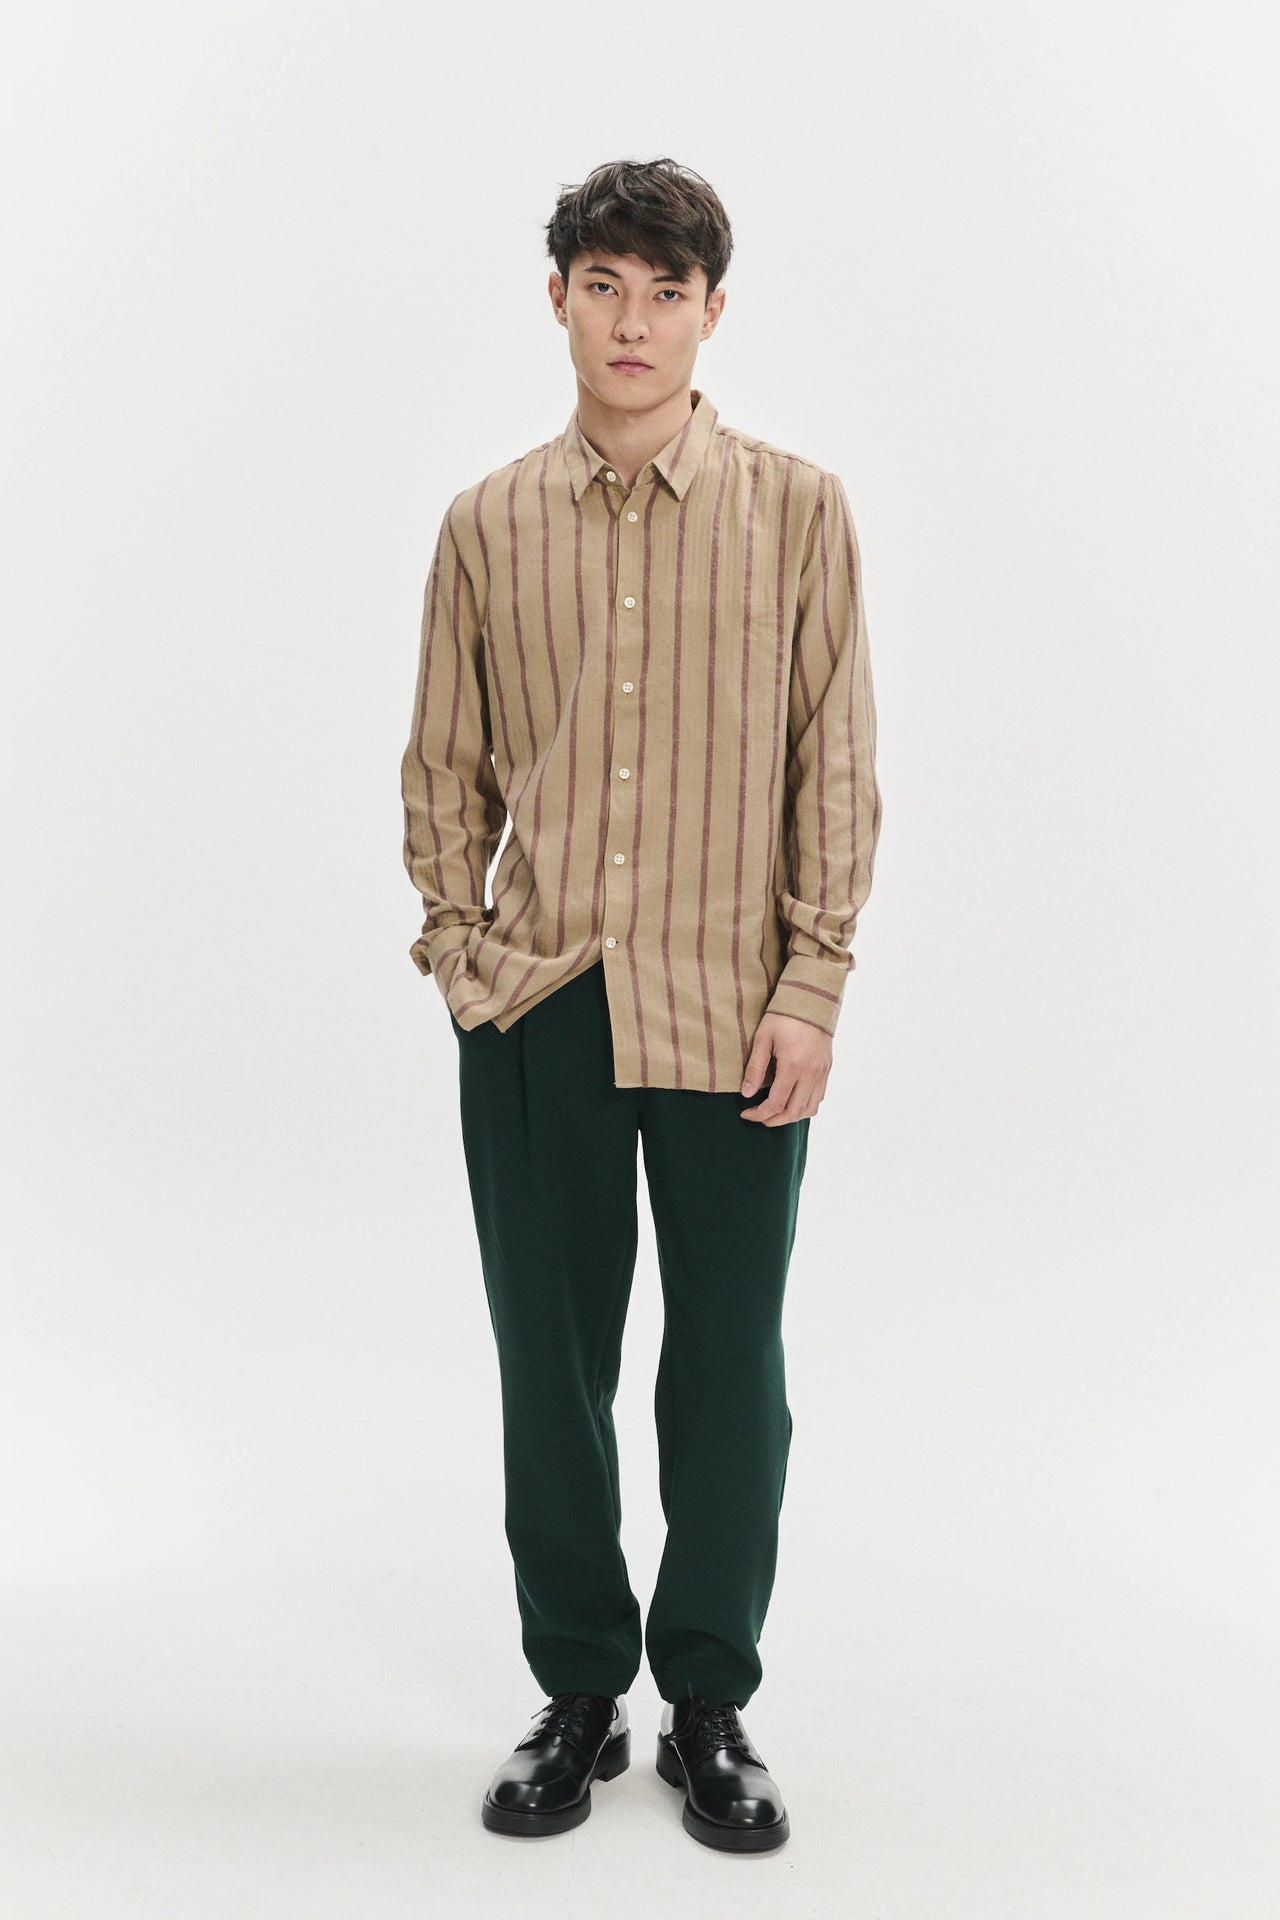 Feel Good Shirt in a Tonal Beige and Bordeaux Subtle Striped Herringbone Japanese Cotton Flannel